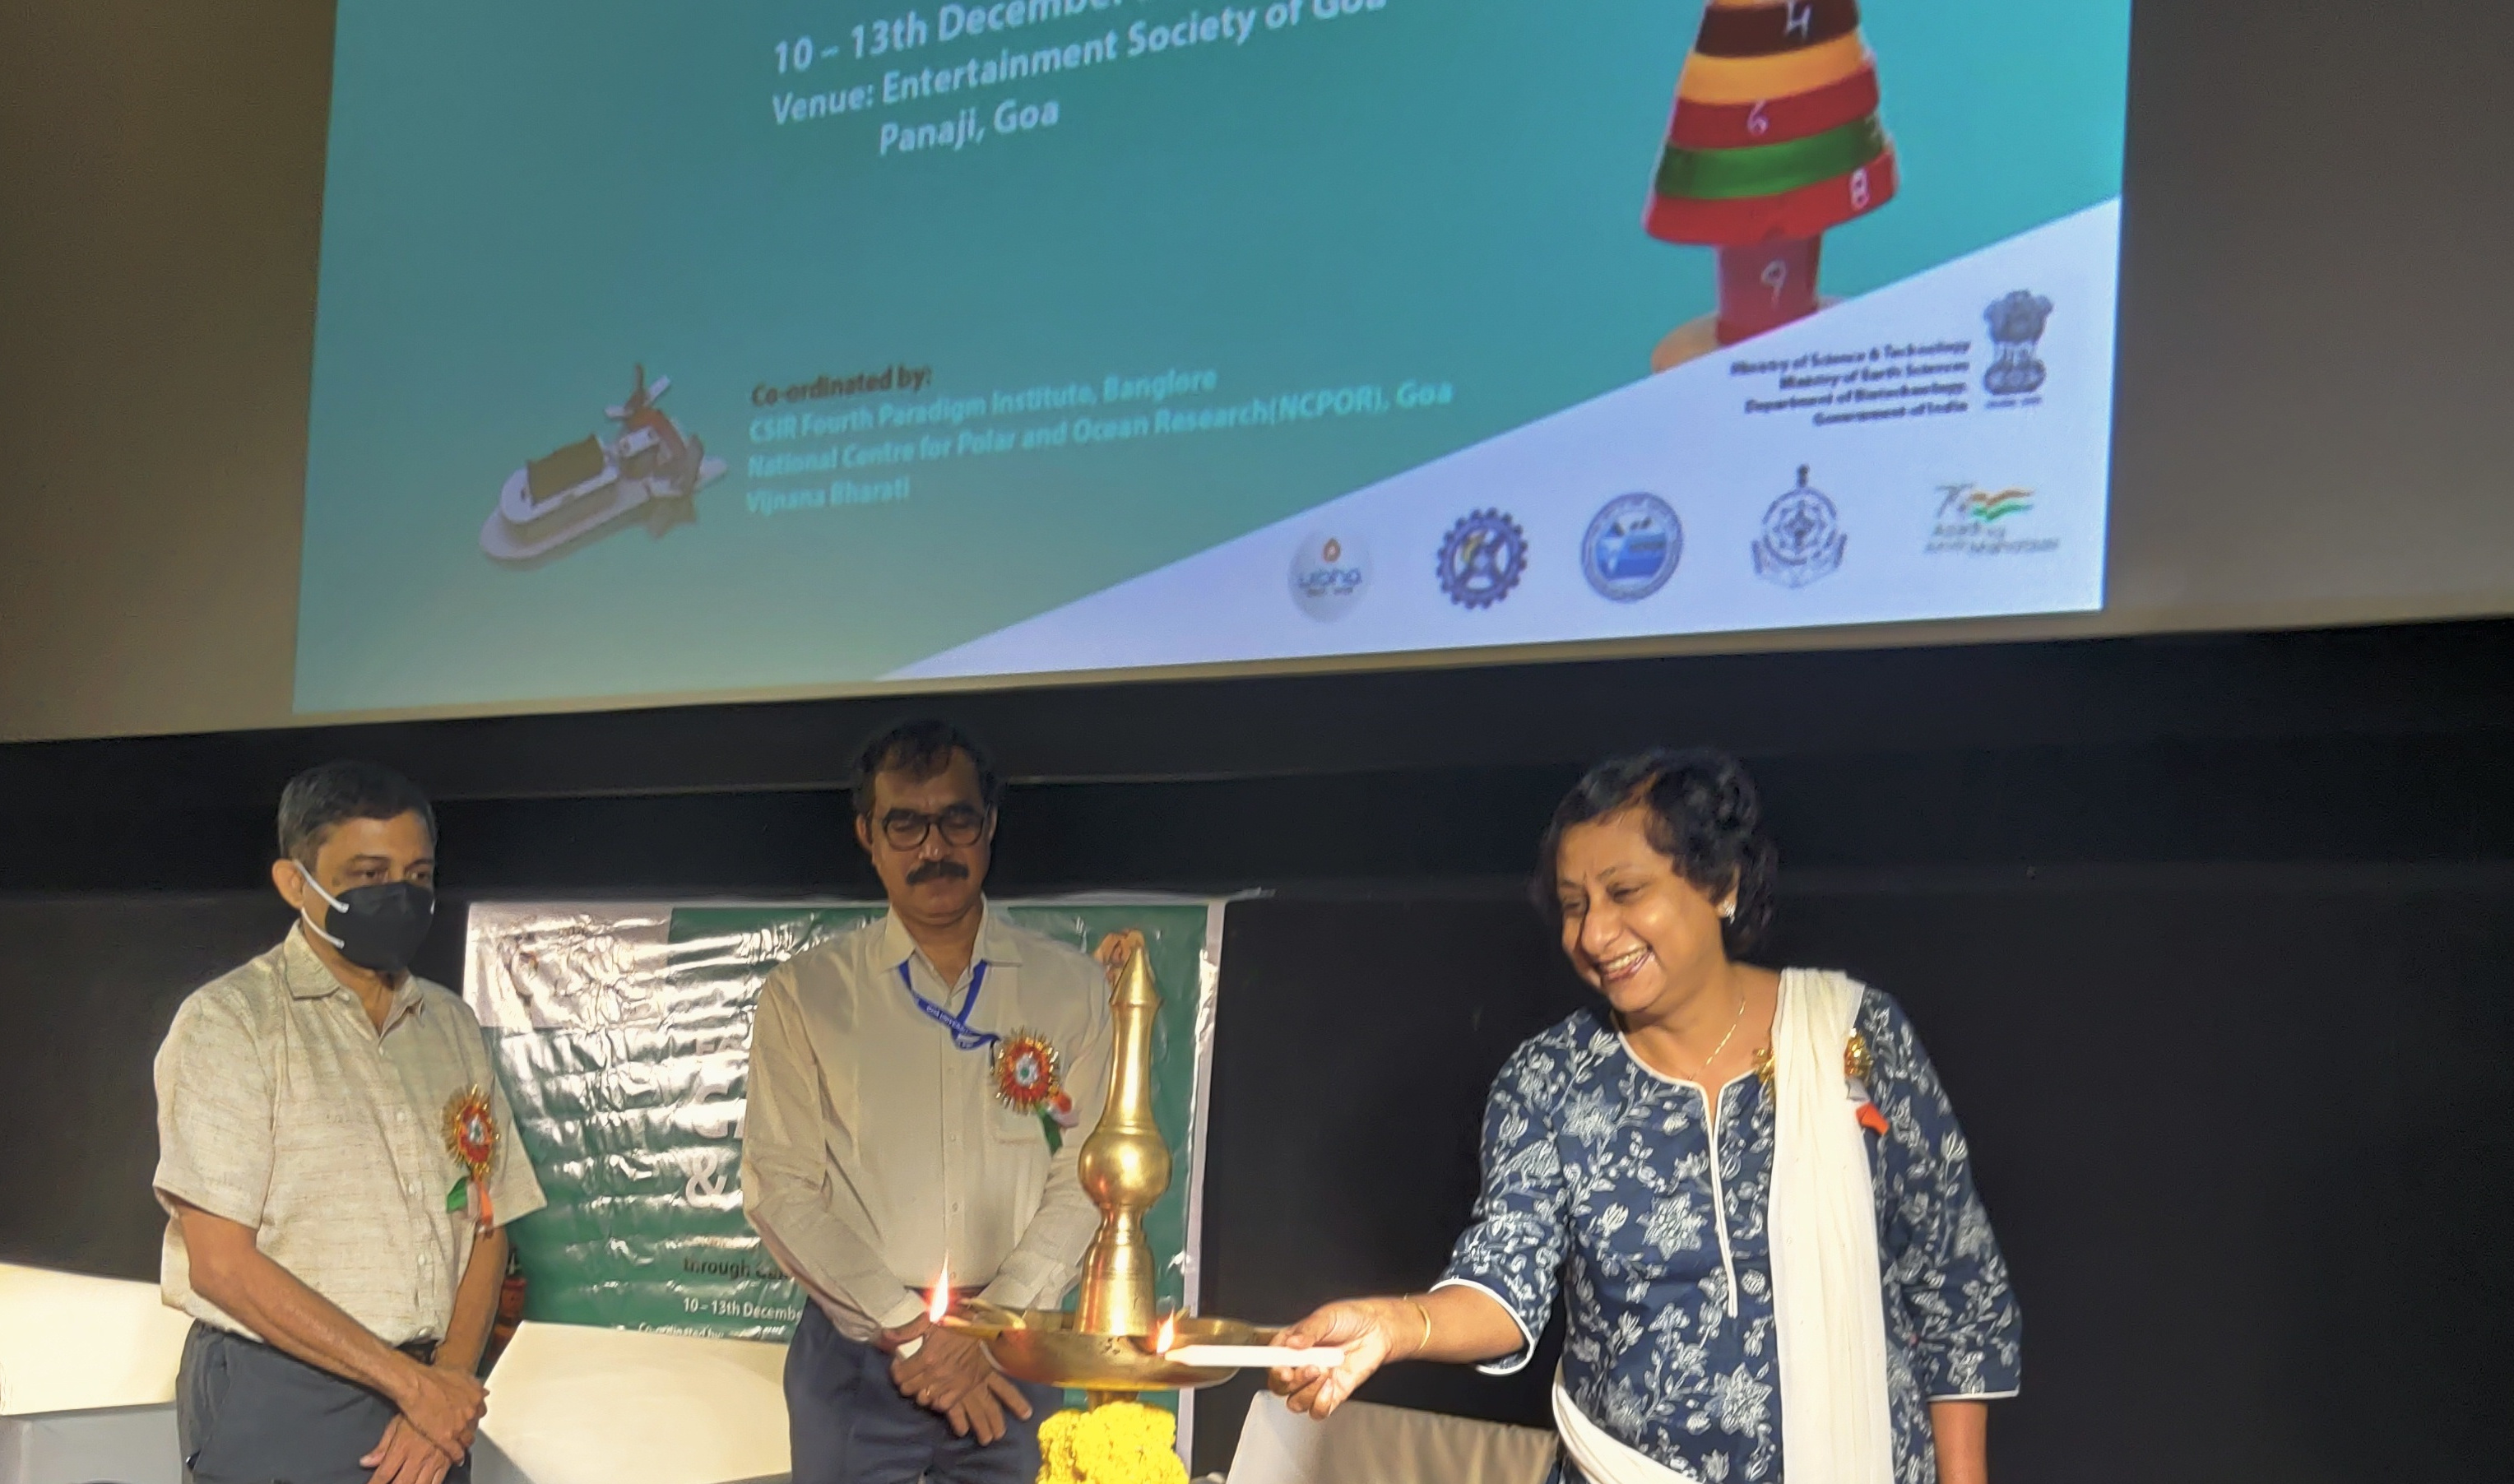 Inauguration of Festival of Games and Toys Event co-ordinated by CSIR-4PI in IISF 2021 at Goa.